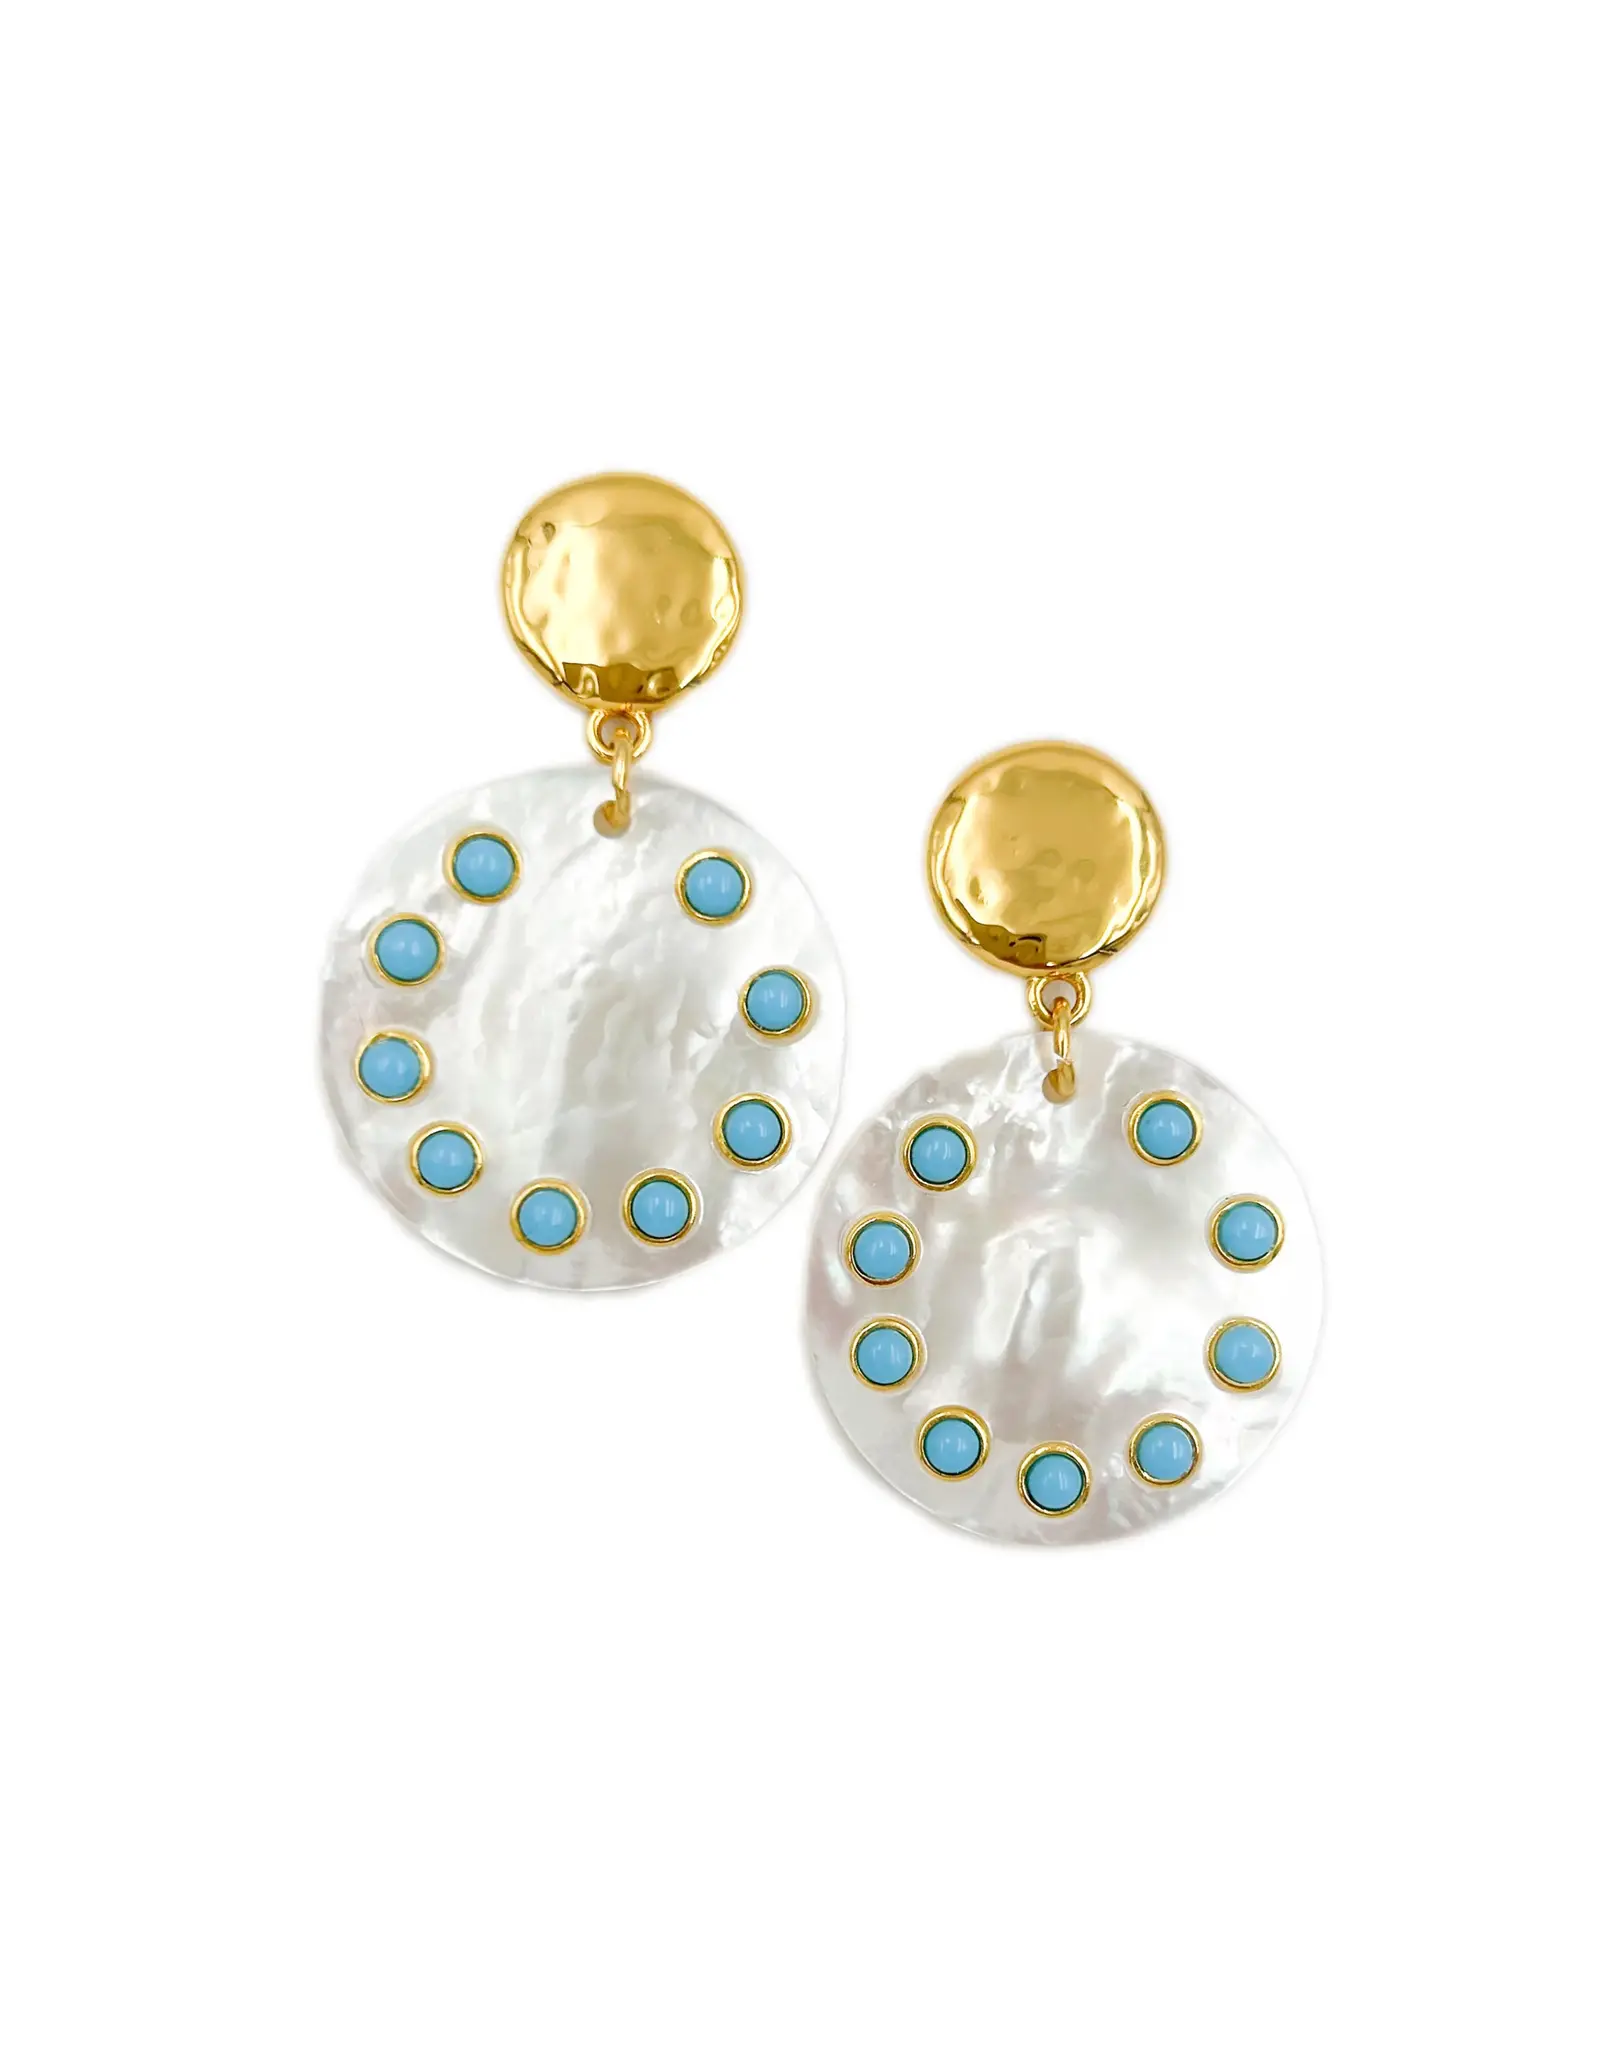 NEST Jewelry Nest Turquoise Studded Mother of Pearl Earrings